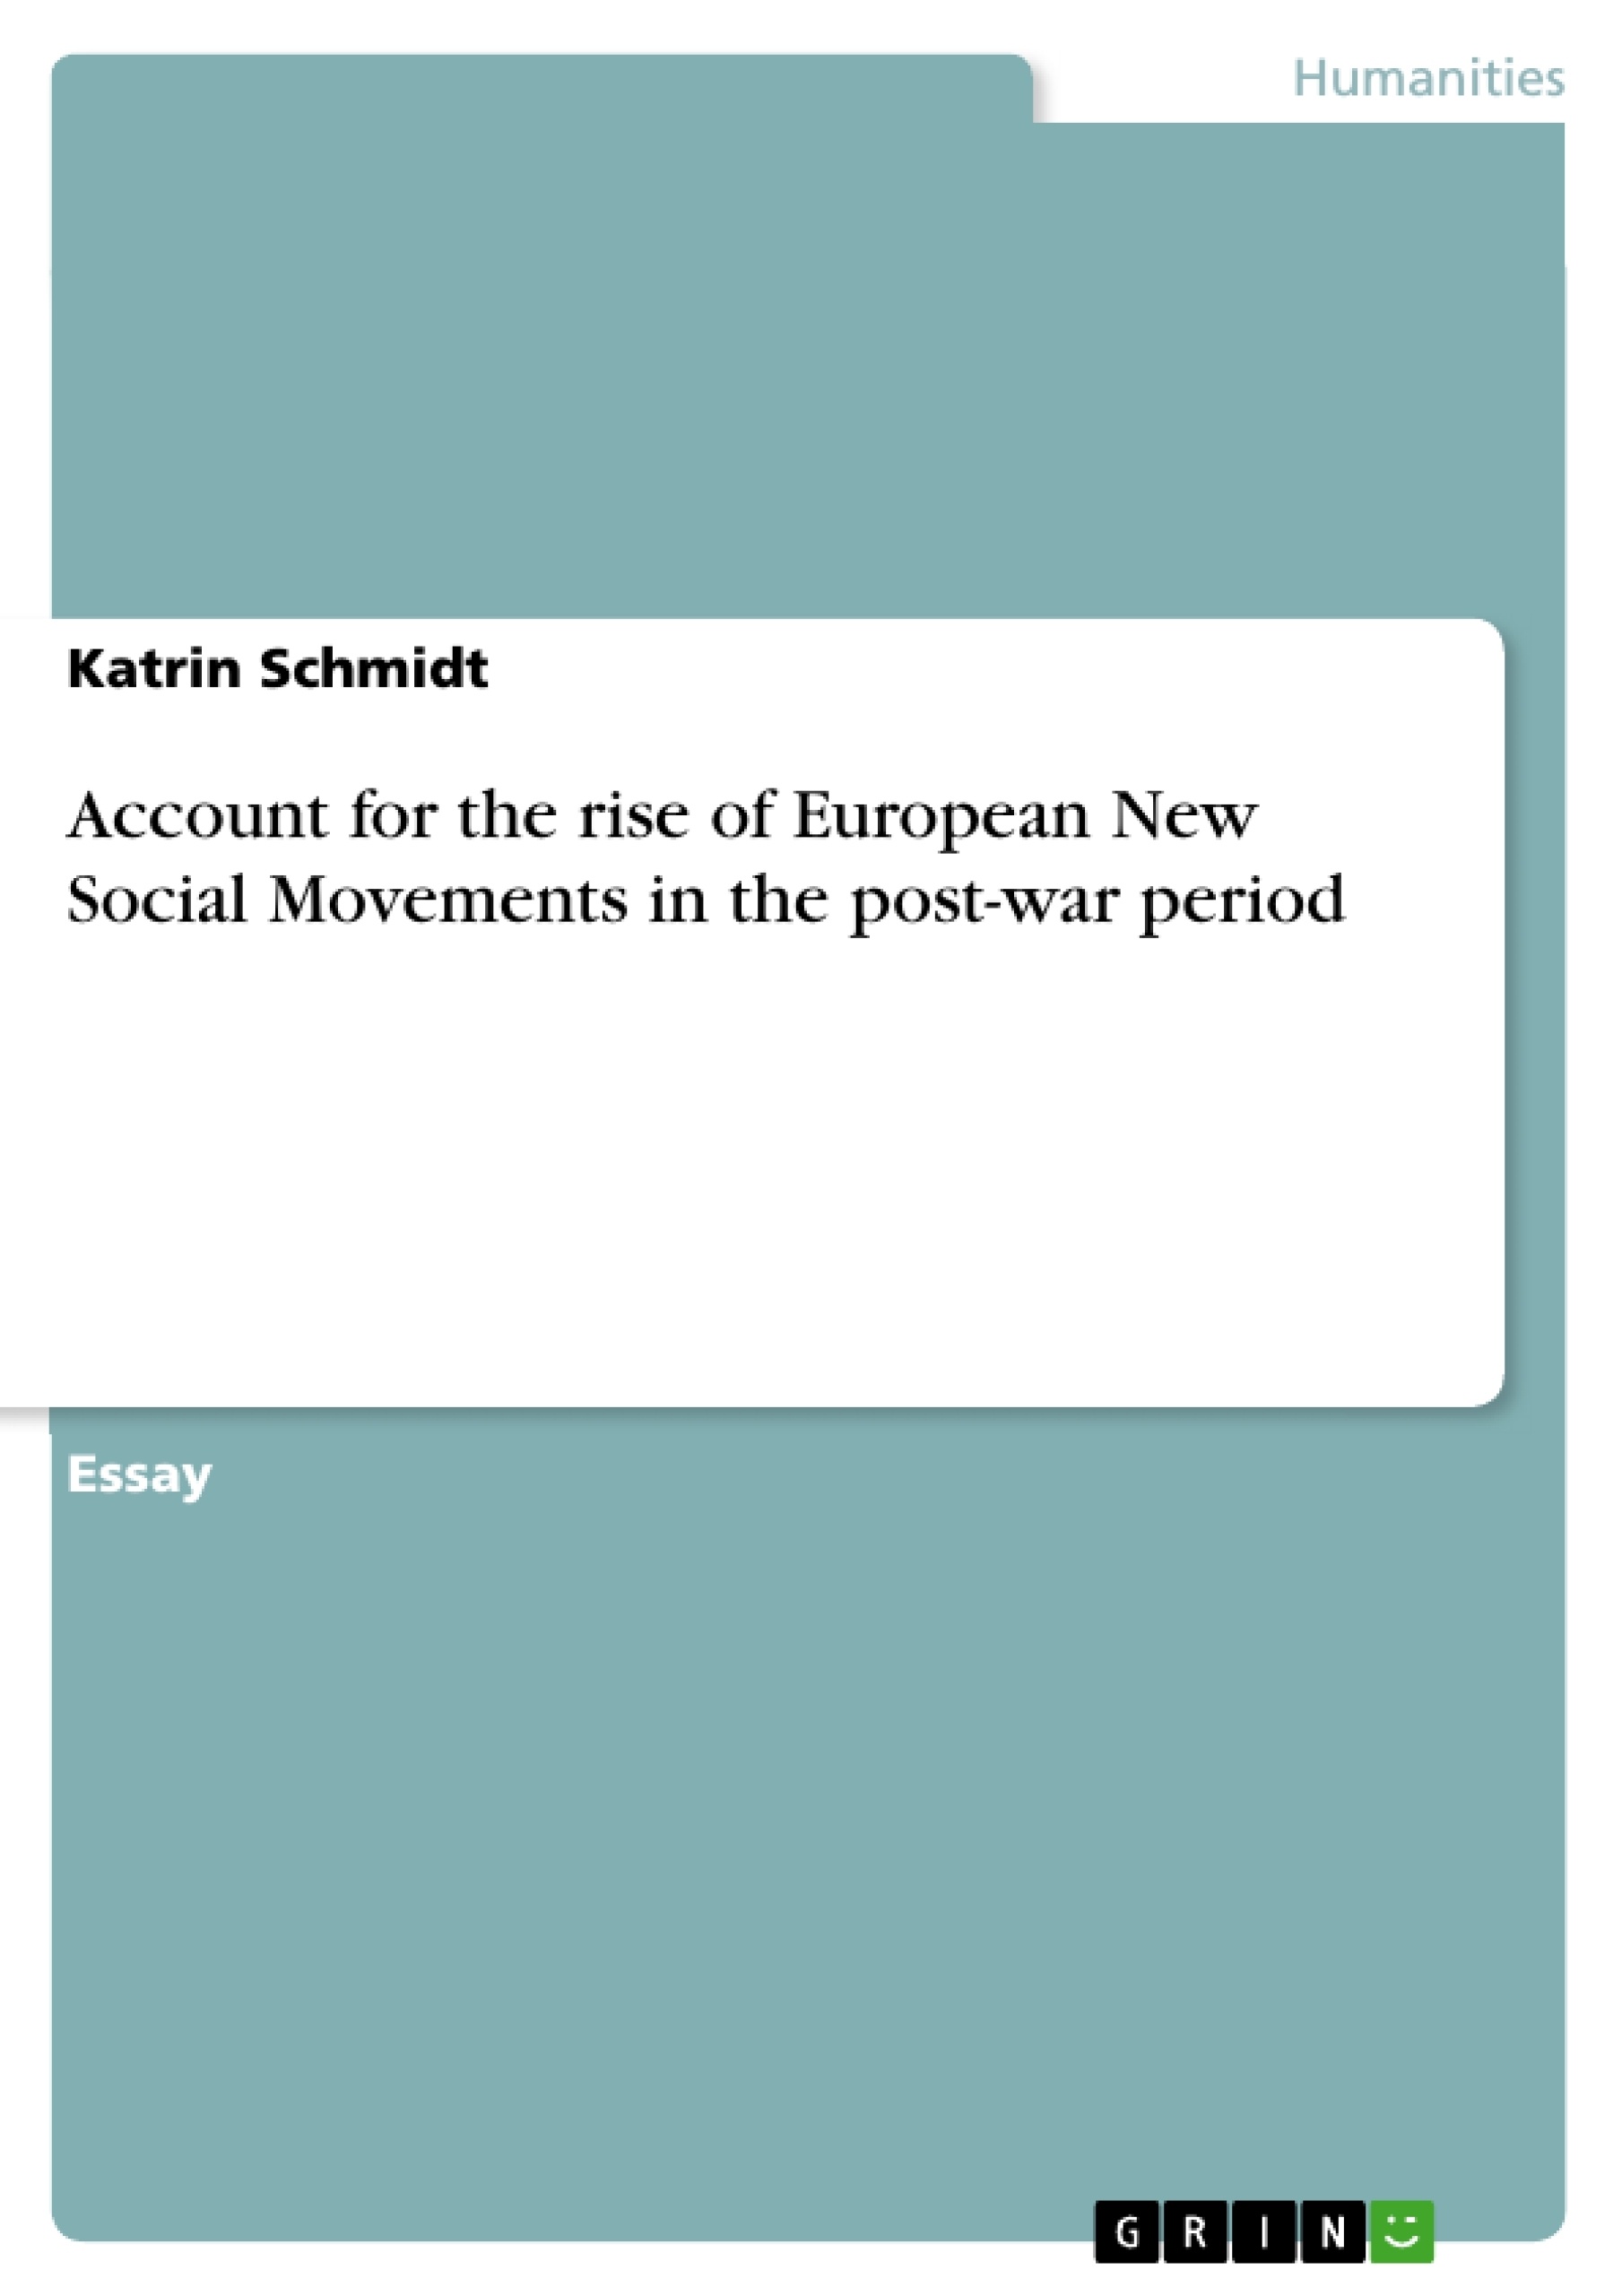 Title: Account for the rise of European New Social Movements in the post-war period